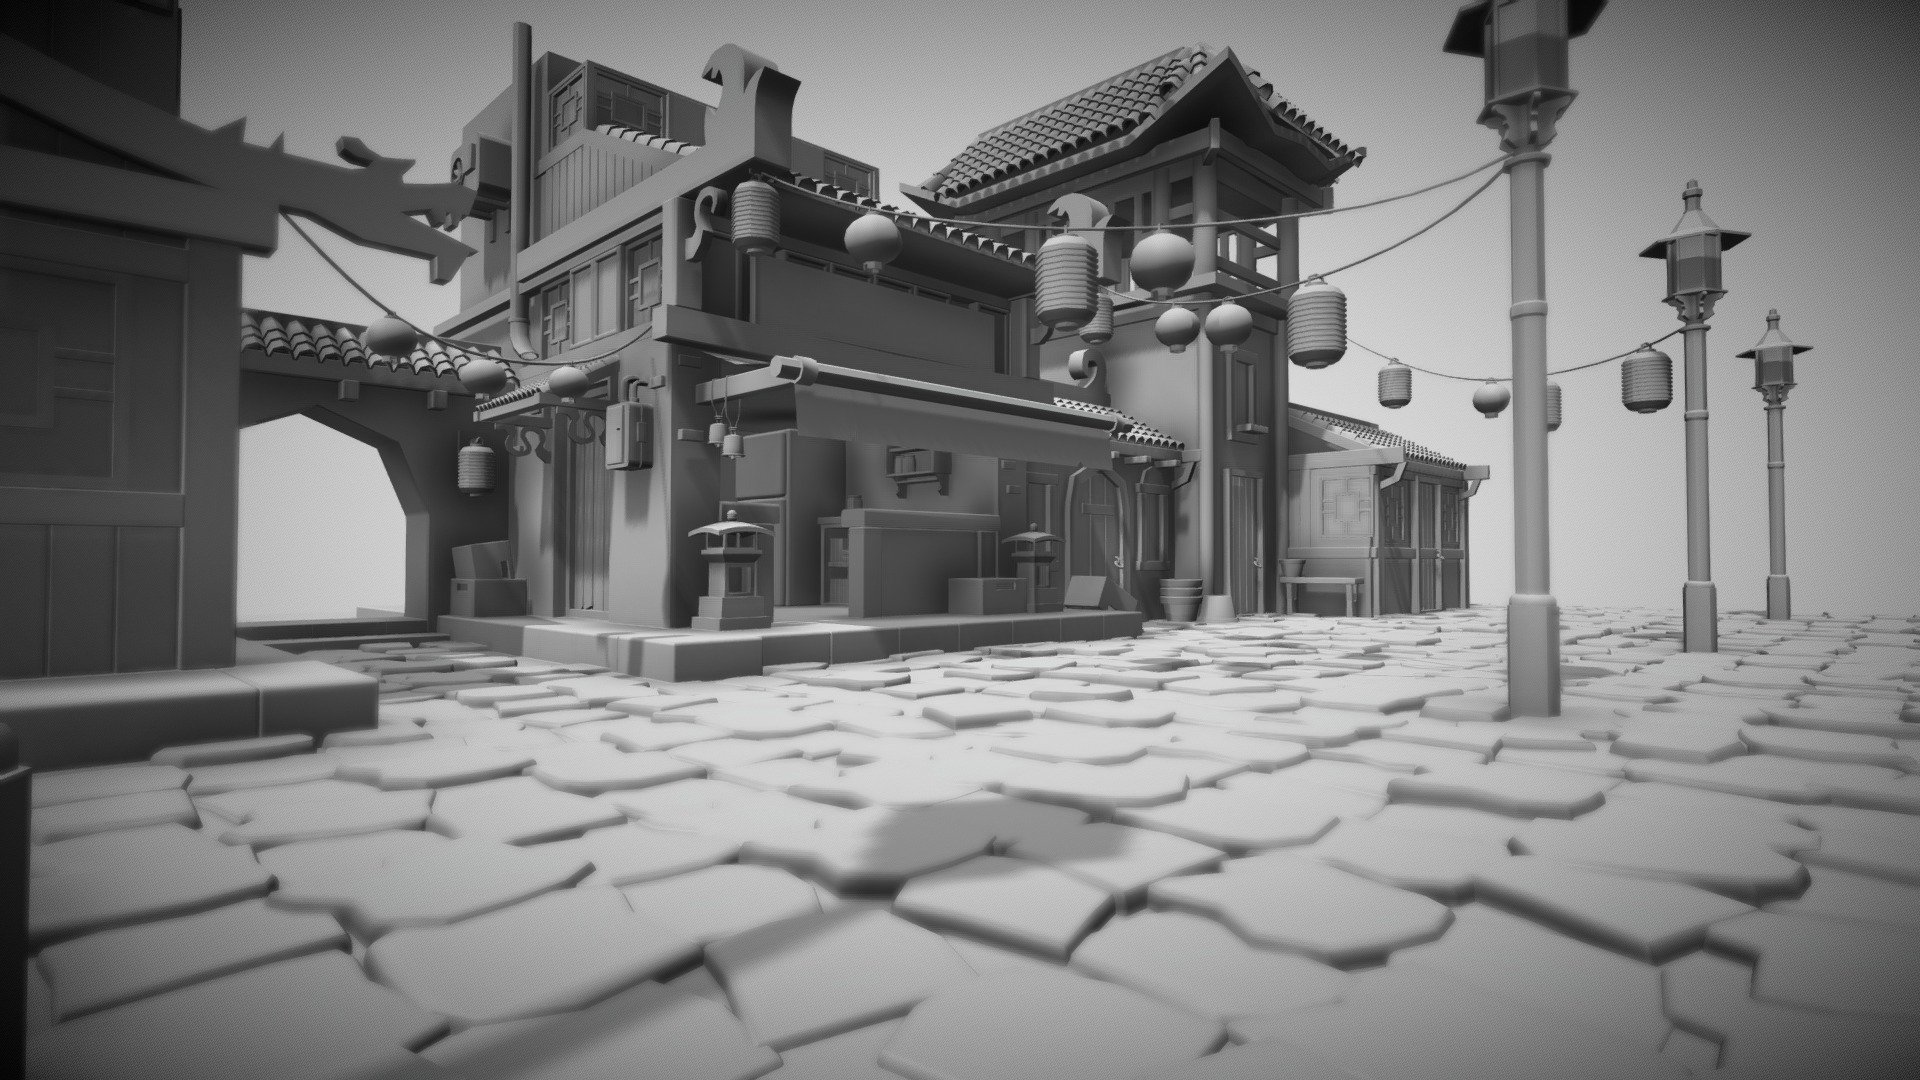 This is a Japanese style market environment i made in maya. this took 2 days to model, right now i didn't done any texturing on this but i'm planning to do in future. please share your views on this i would love to know what are your view and how can i improve my modelling techniques 3d model